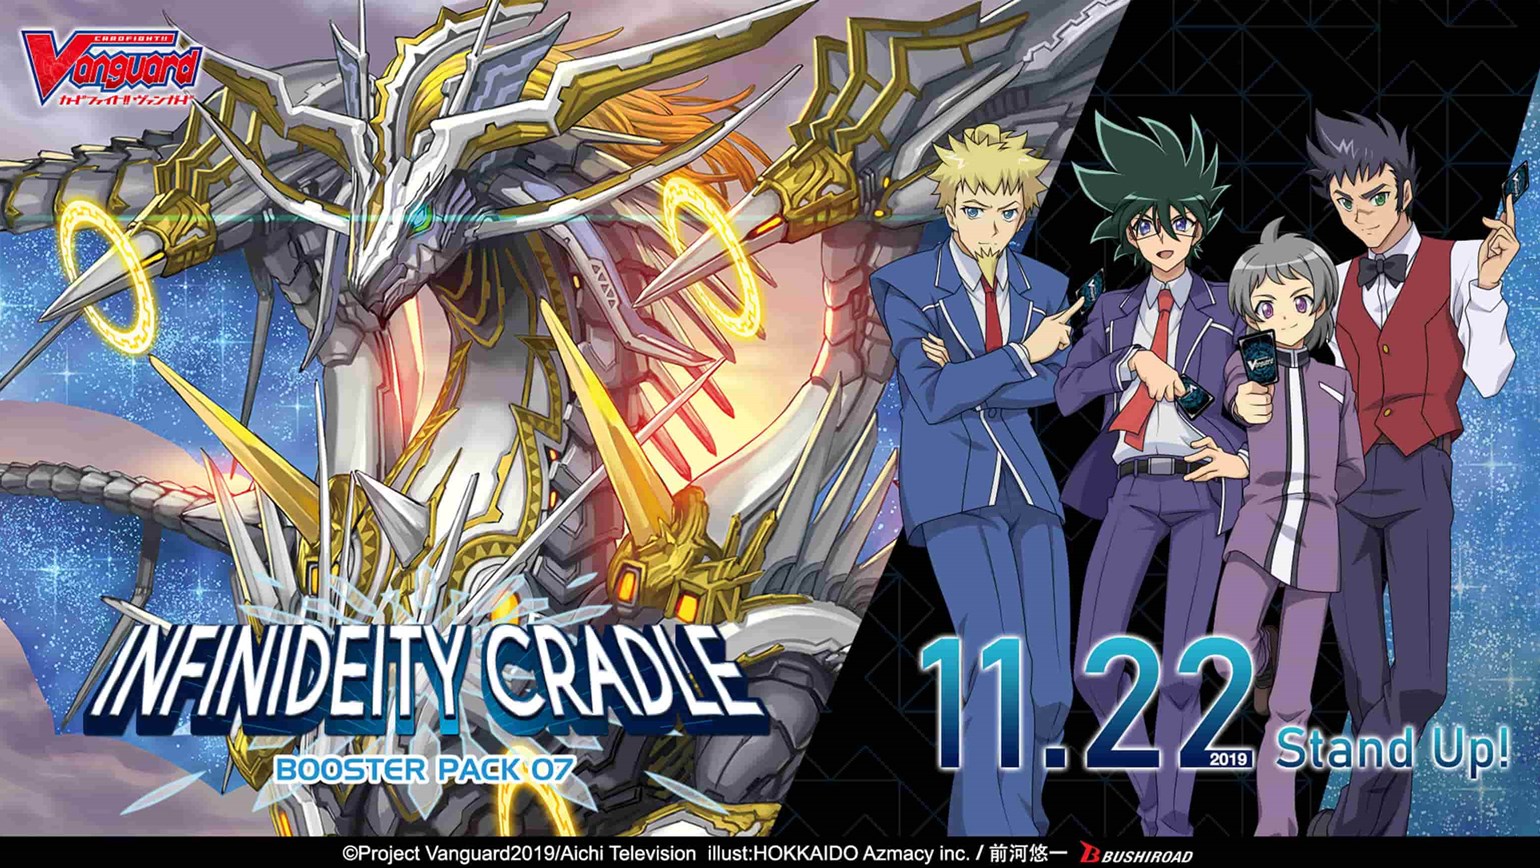 English Edition Cardfight!! Vanguard Booster Pack Vol. 07: Infinideity Cradle Coming November 22nd